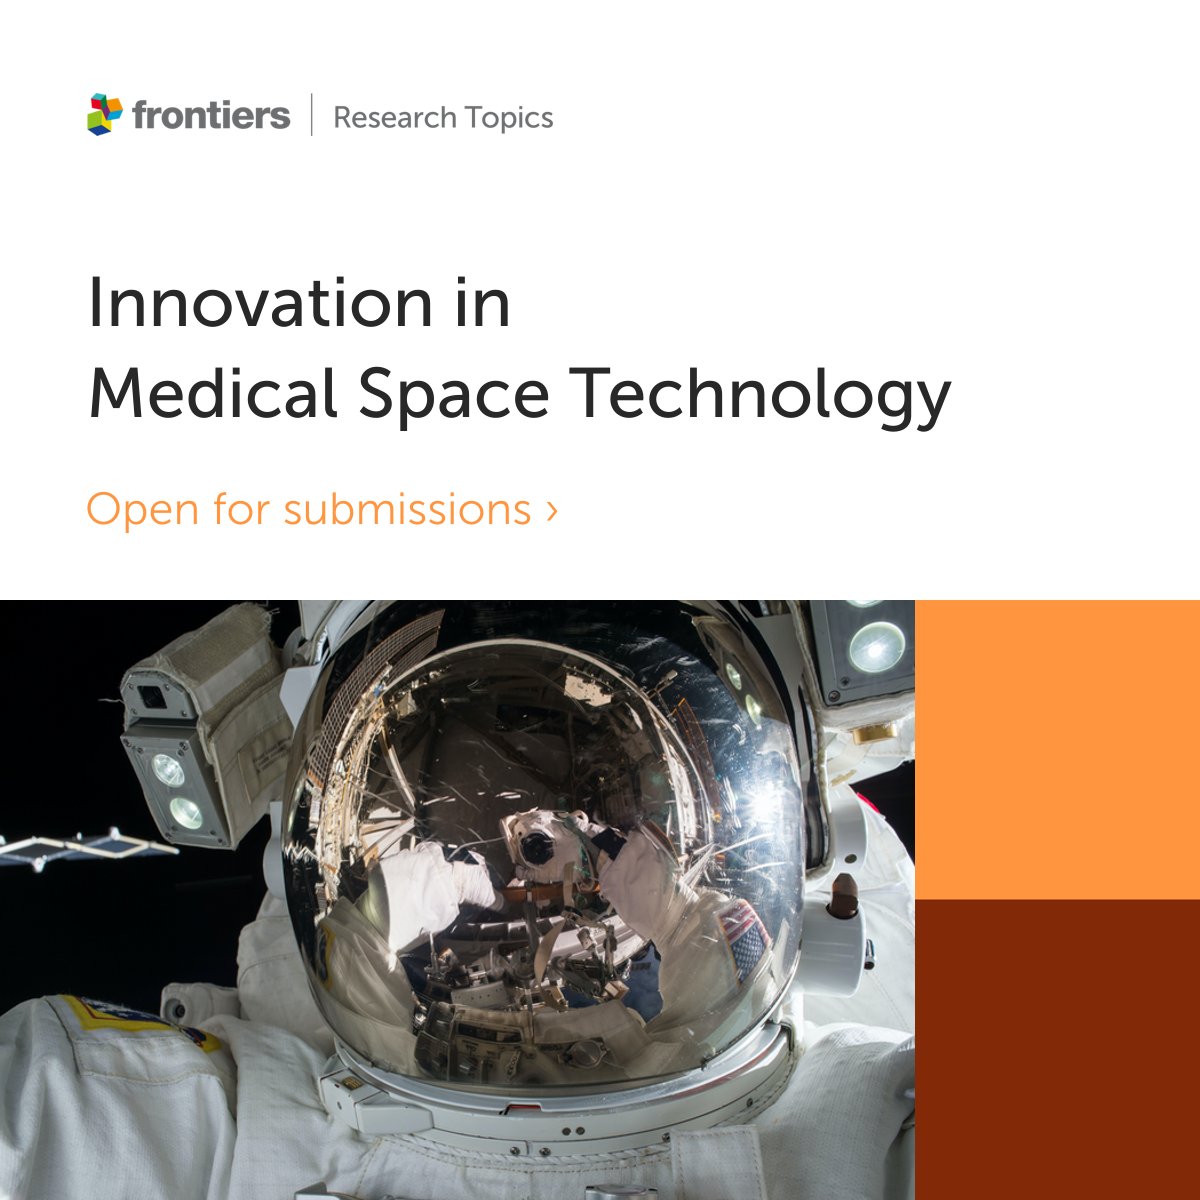 🚀Join the @FrontSpaceTech of @FrontiersIn in #Innovation in Medical Space Technology! The editorial board has experts from @Aero_Med, @KingsCollegeLon #uk, @ontariotech_u #canada, @RMLDelhi #india and #NASRDA #nigeria. frontiersin.org/research-topic… #deepspace #medtech